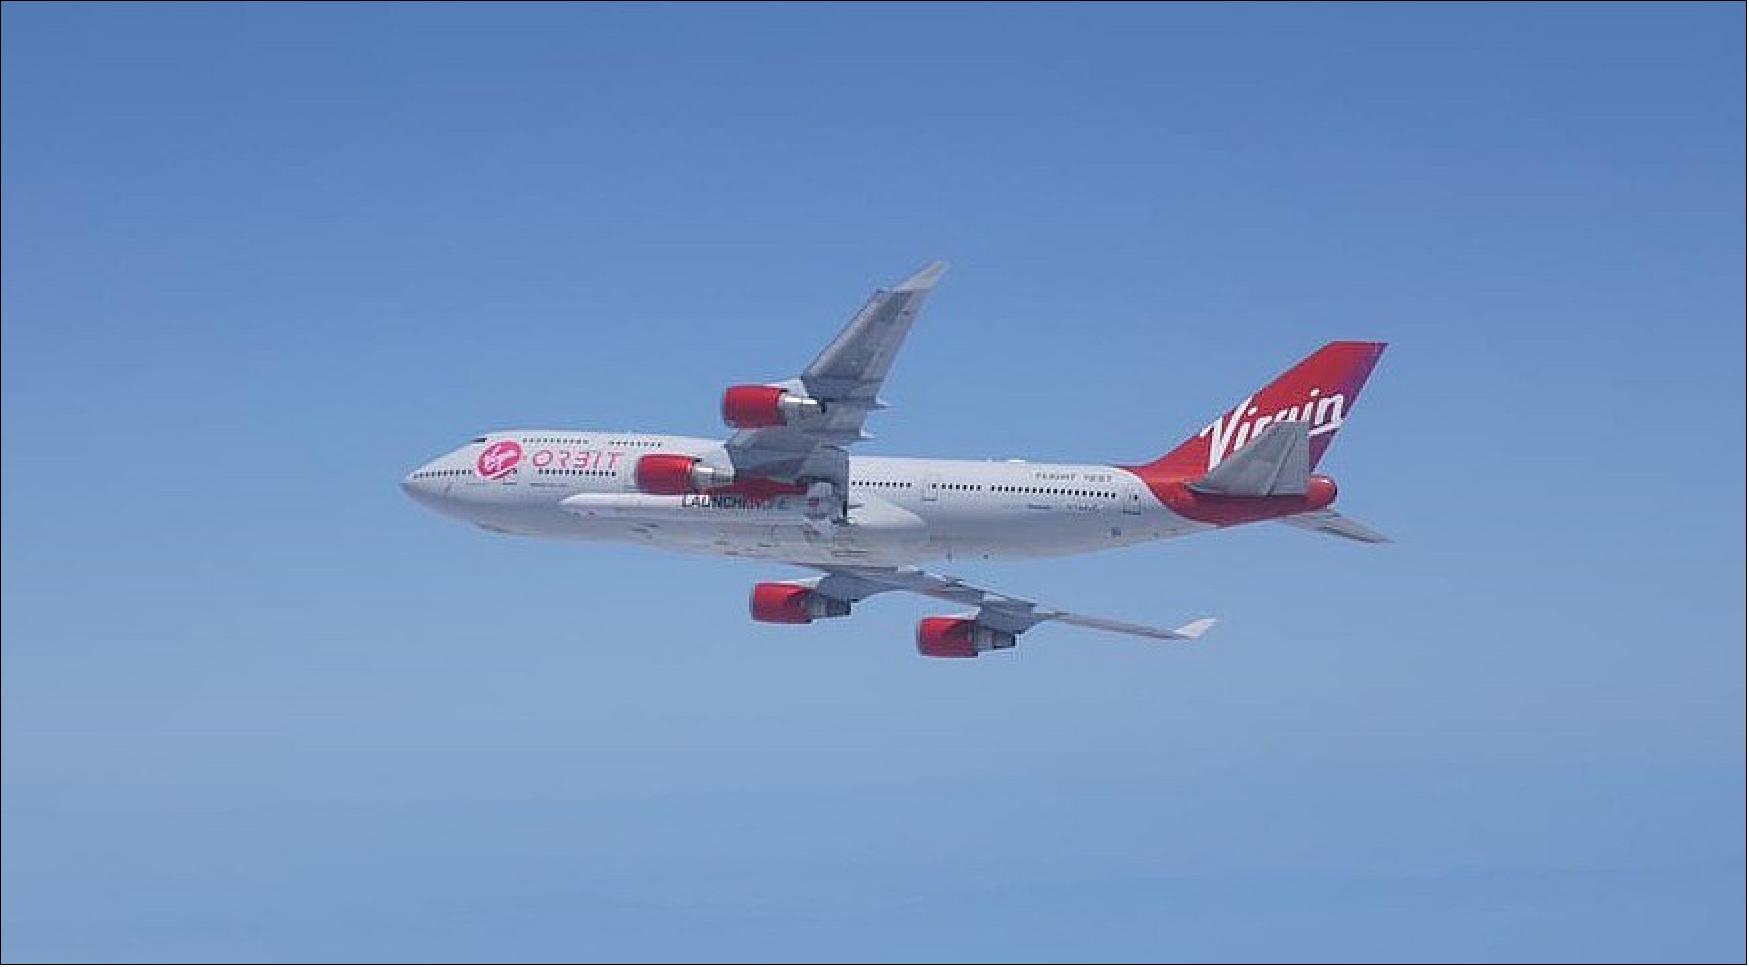 Figure 3: Virgin Orbit's Boeing 747 with the LauncherOne rocket attached shortly before the rocket's release May 25 on an unsuccessful orbital launch attempt (image credit: Virgin Orbit)